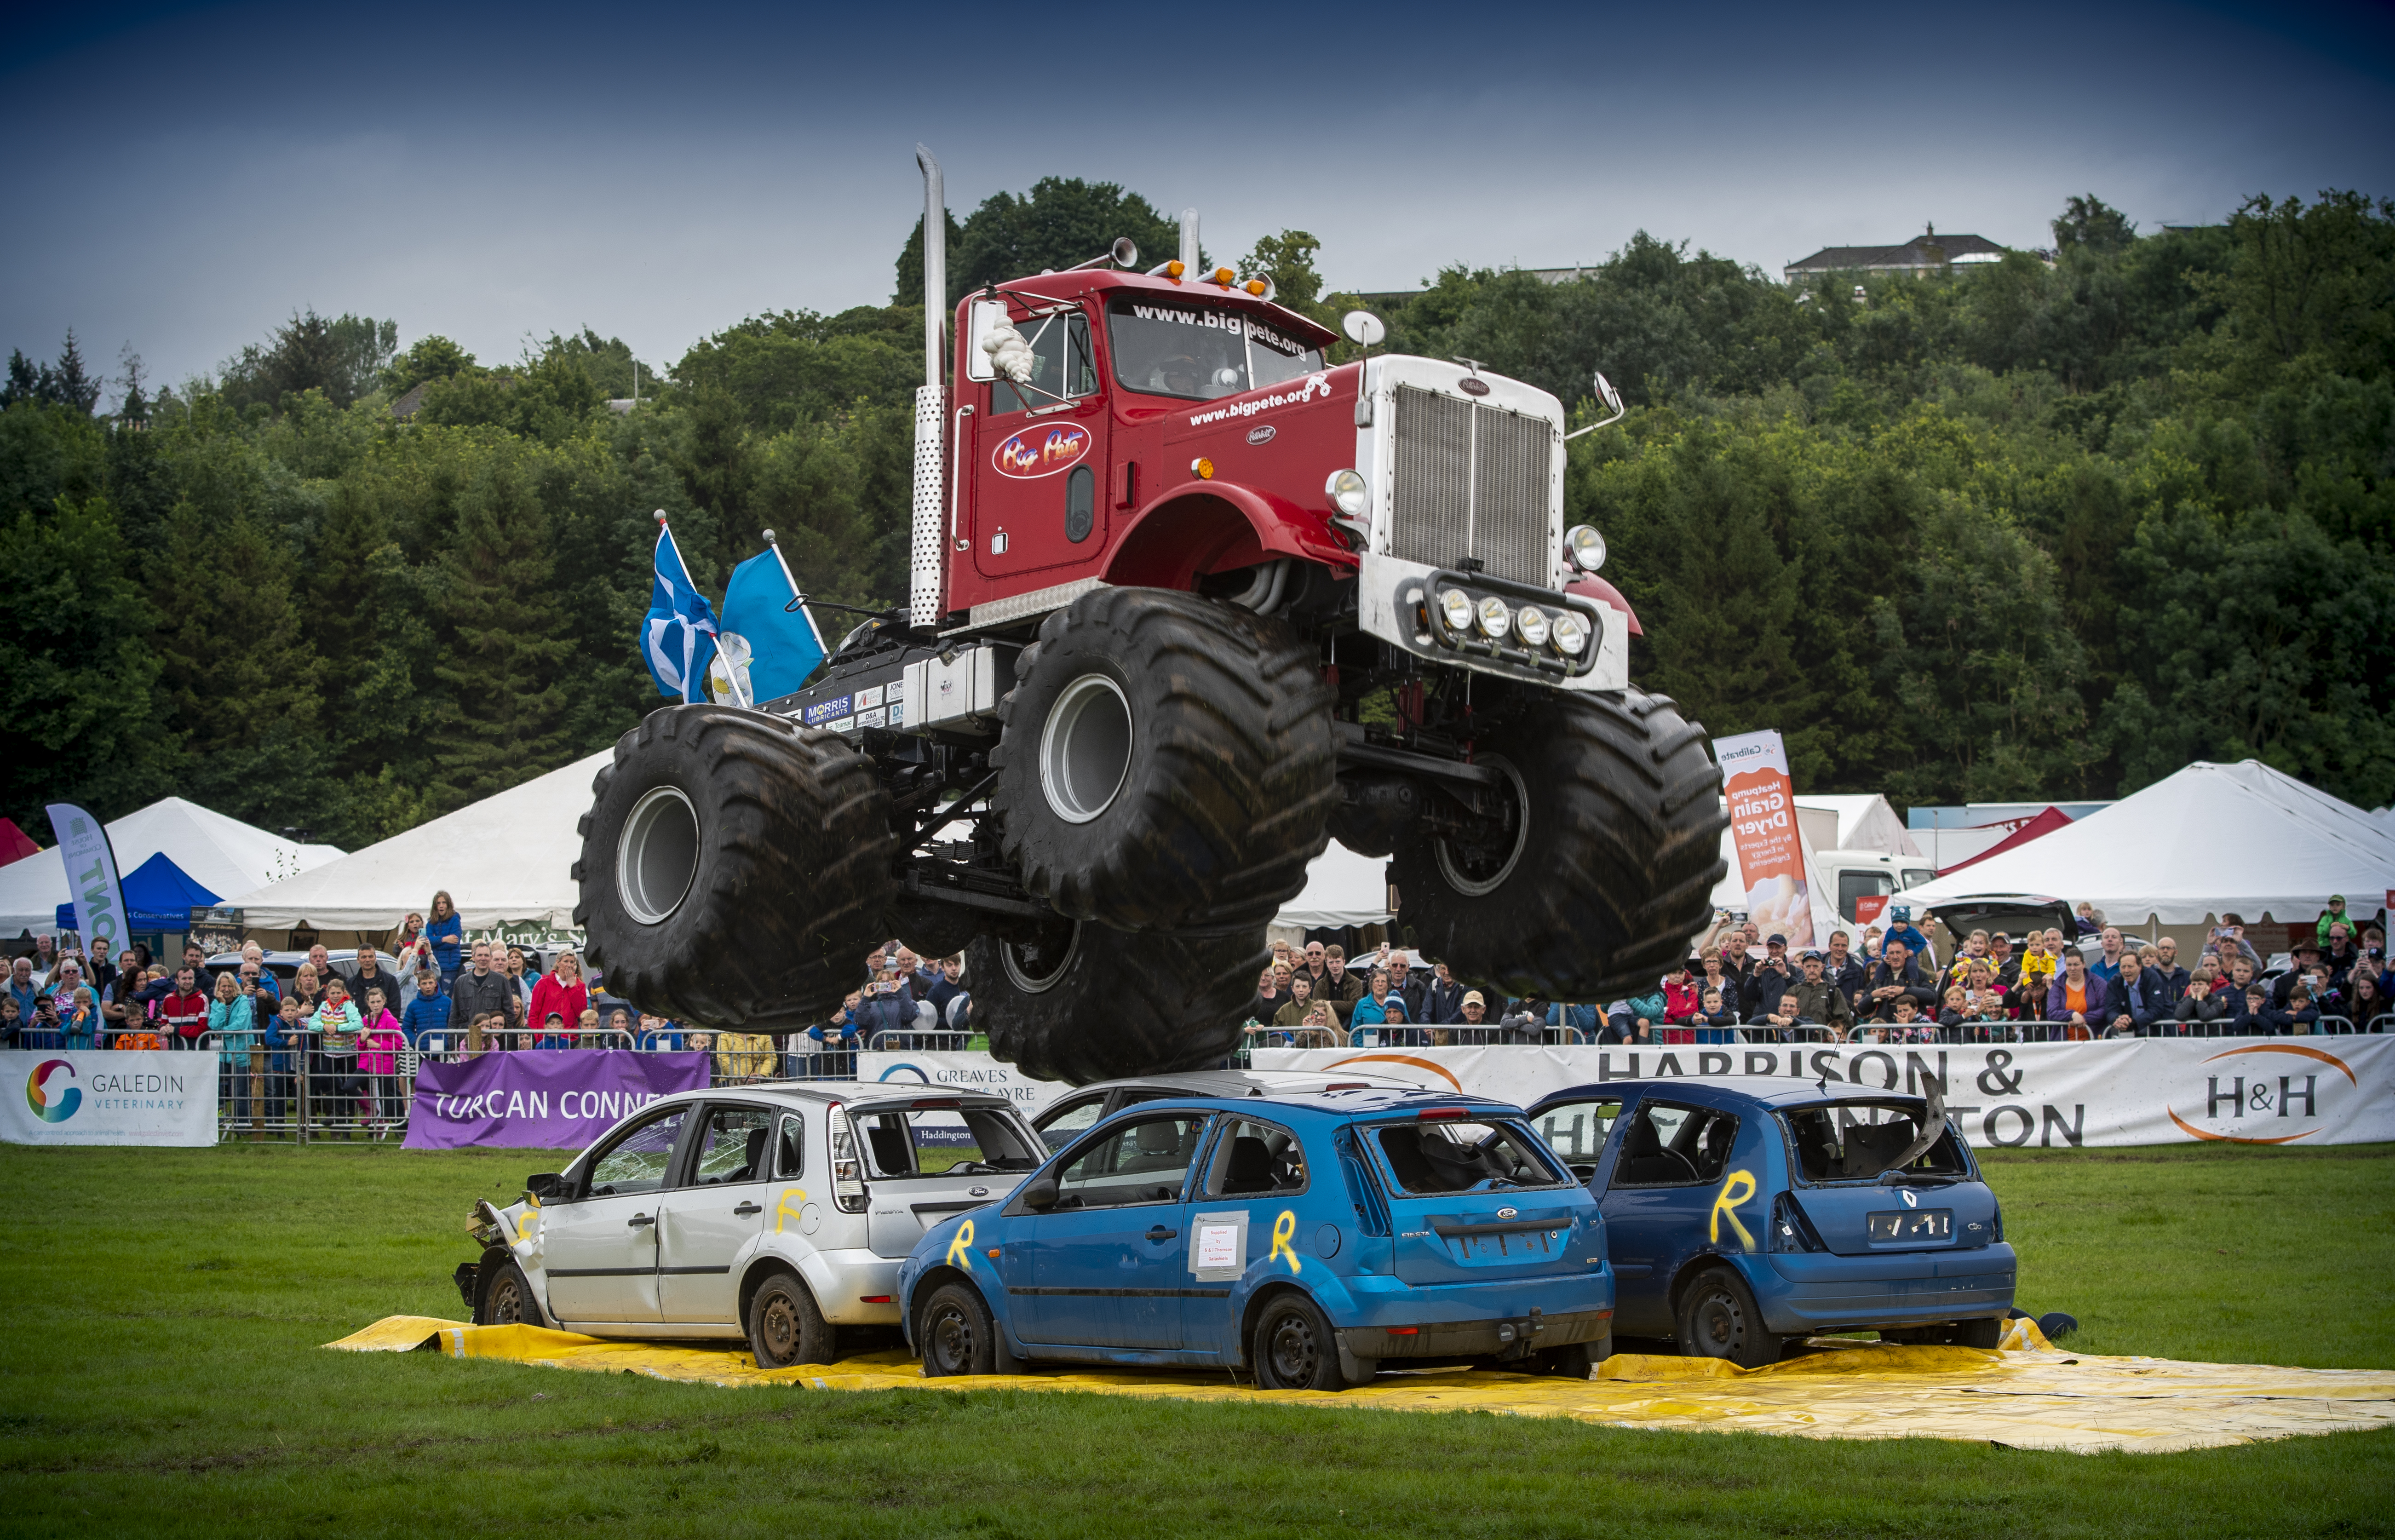 A Monster Truck at the Border Union Show 2019


Pic Phil Wilkinson 
info@philspix.com
Tel 07740444373